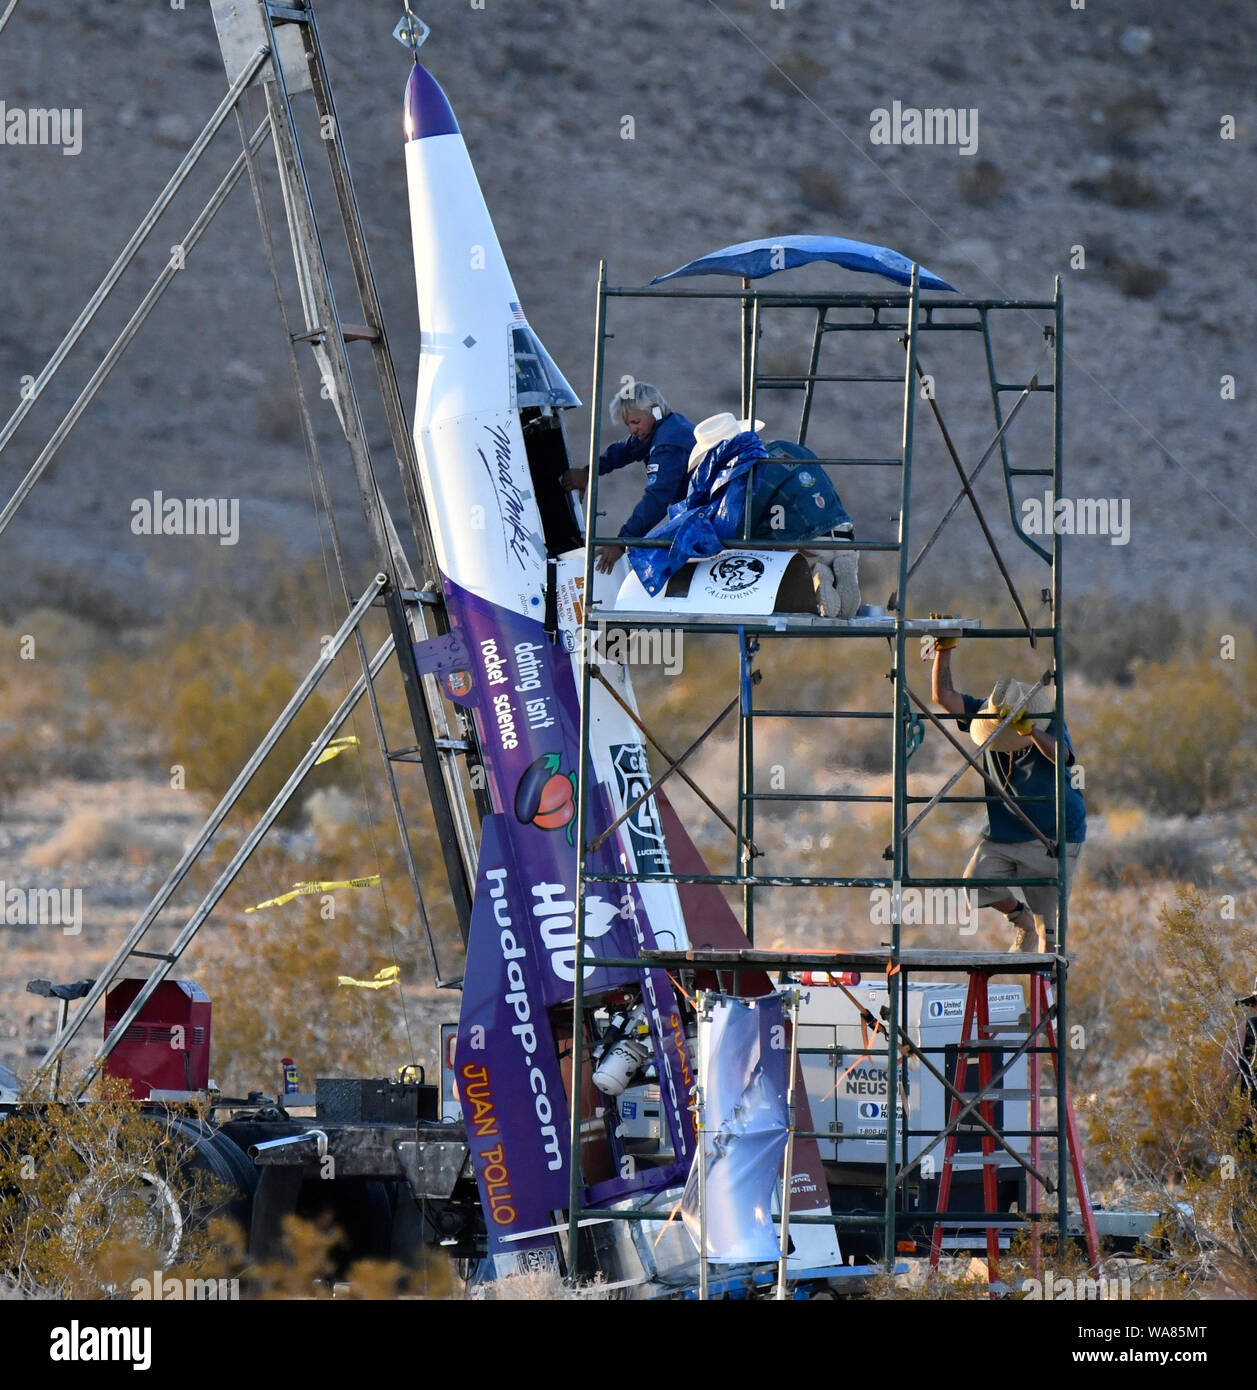 After a long 8+hours in 110 degree heat ''Mad'' Mike Hughes and crew suffered a 3rd scrub launch attempt  Saturday  Aug 17,2019. Mike started to feel burning pains on his back after getting into the cockpit before launching, with the cause after a long time of heating a trying to get to 250 psi the seat was over heating from this and they called off the launch at 7:30pm. Mike was wearing a full fire jump suit but the heat from the pads of the seat were to hot to sit on. They will try again next weekend Aug 24-25th as this is part of being filmed by the Science Channel for the upcoming new seri Stock Photo